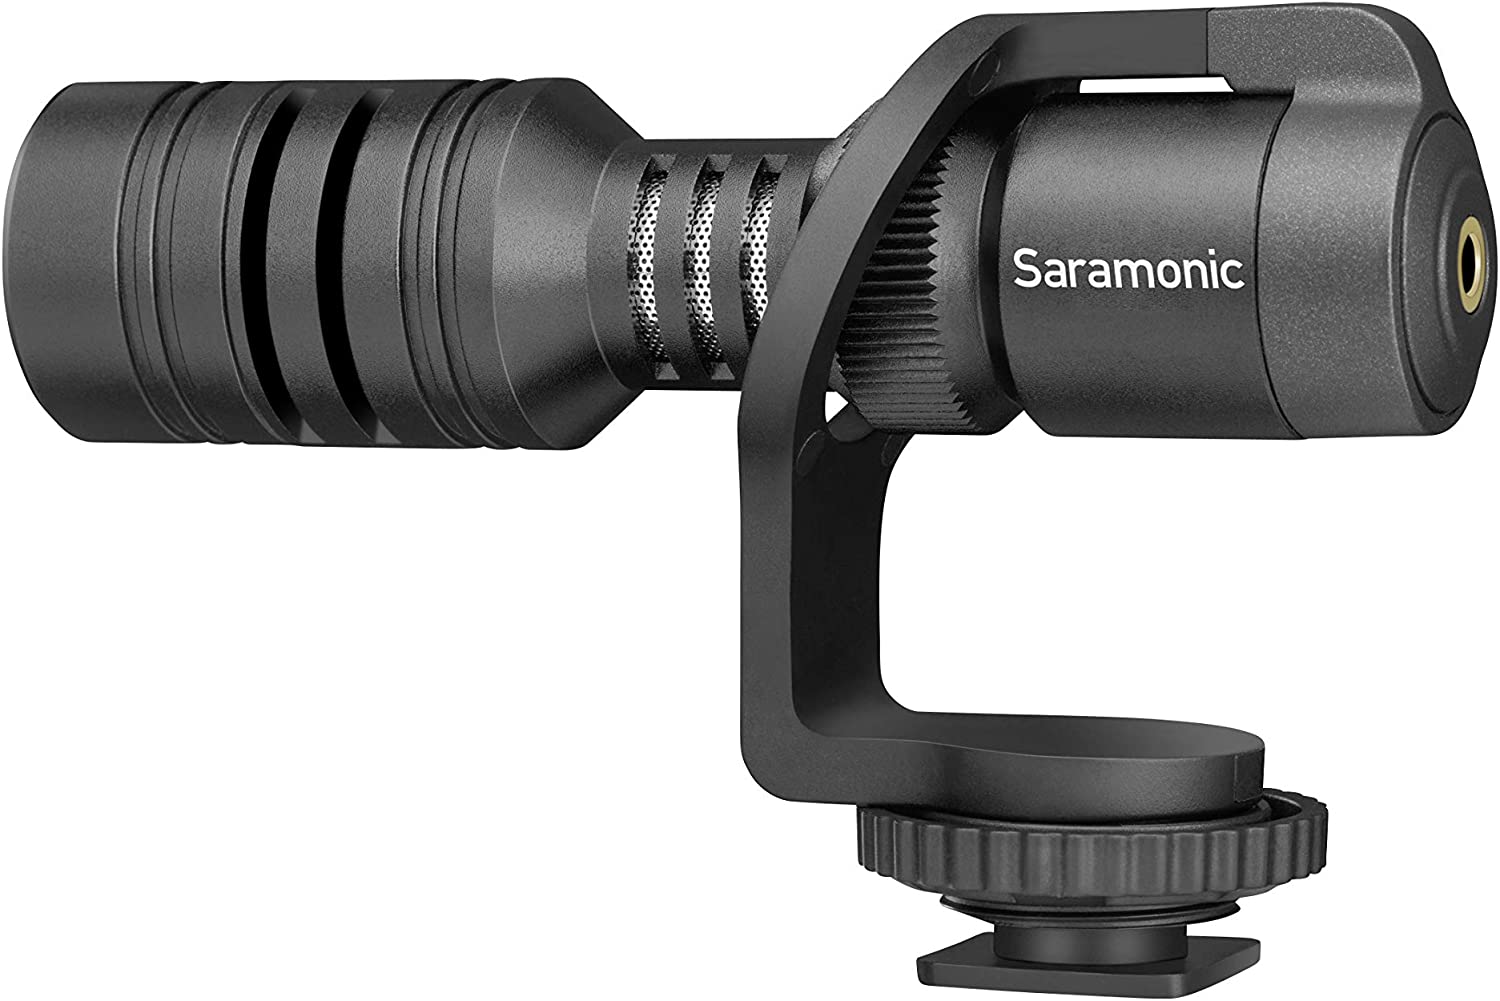 Saramonic Vmic Mini Camera-Mountable Shotgun Microphone for Cameras & Mobile Devices w/ TRS & TRRS Cables